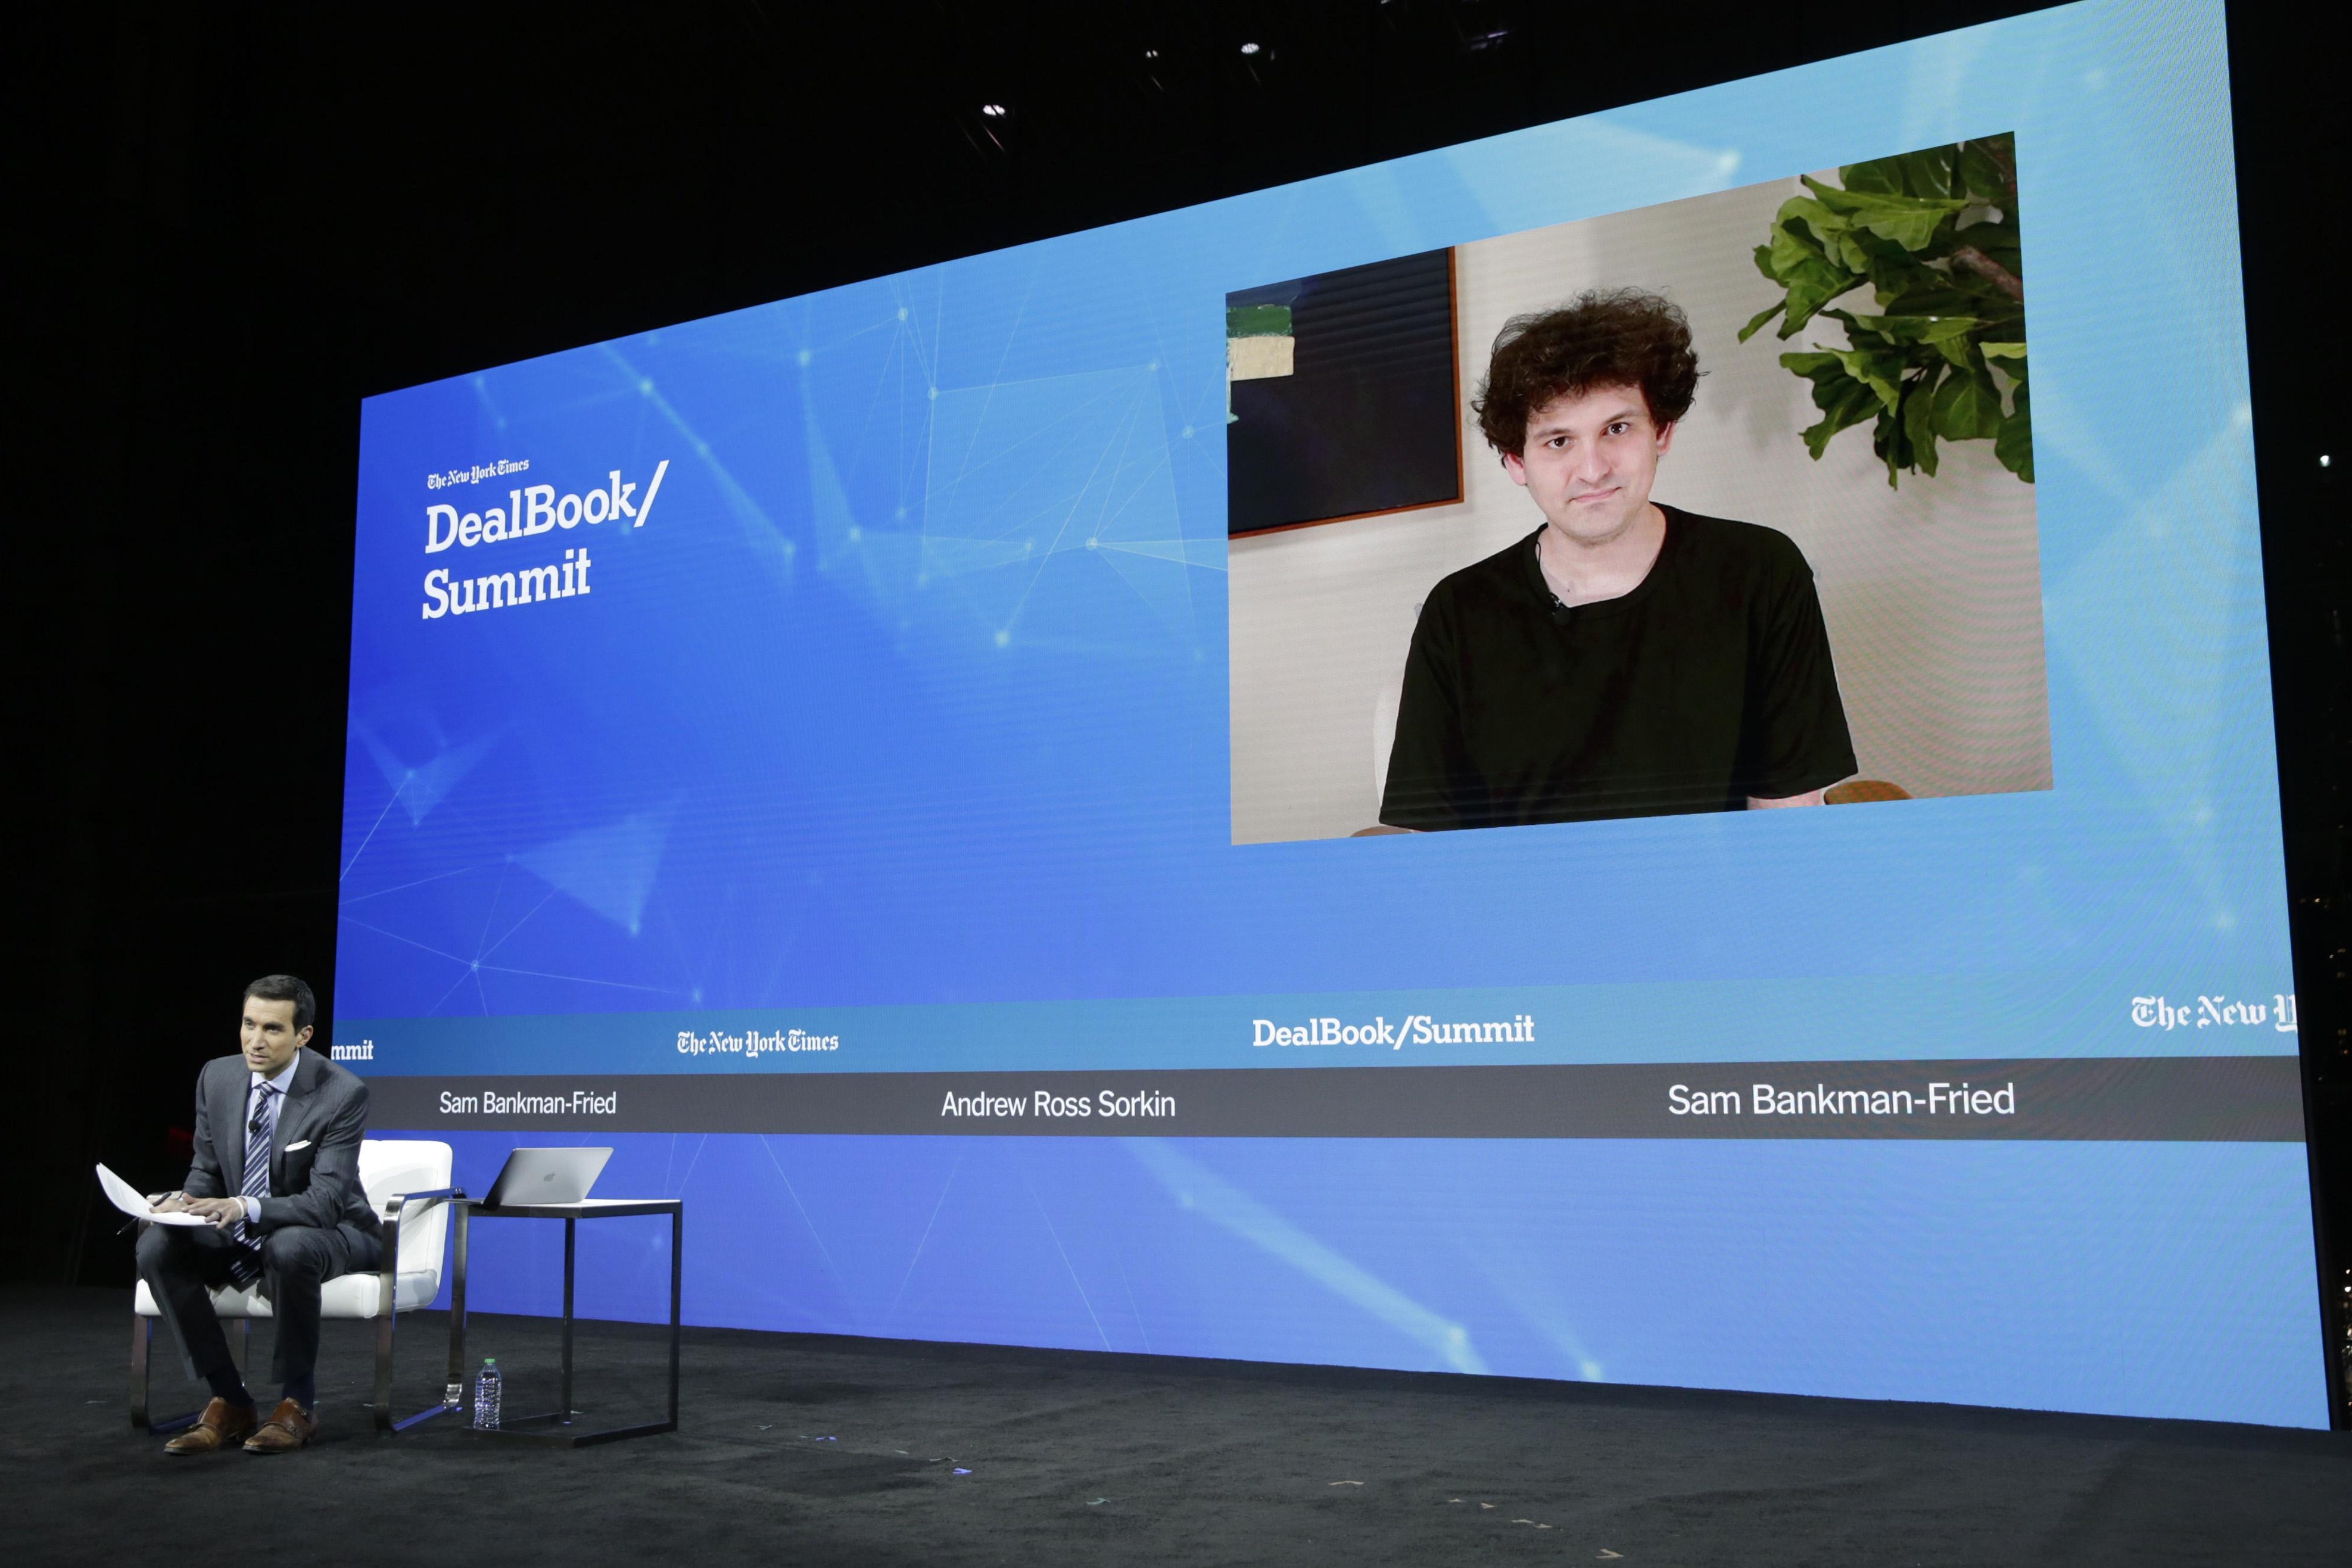 Andrew Ross Sorkin sitting in front of a giant DealBook-themed screen showing Sam Bankman-Fried on a video call.